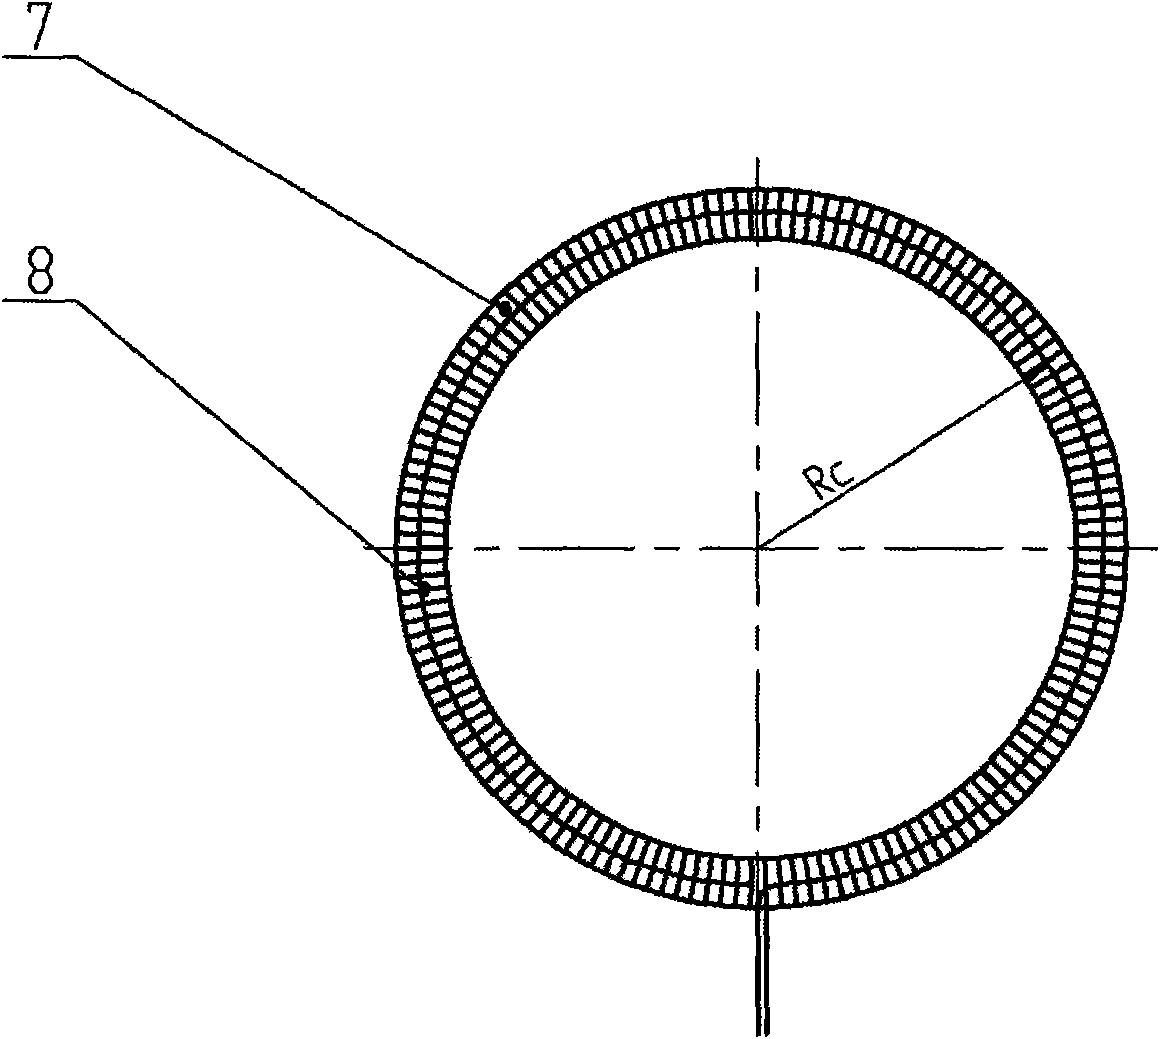 Current sensor adopting differential coil structure